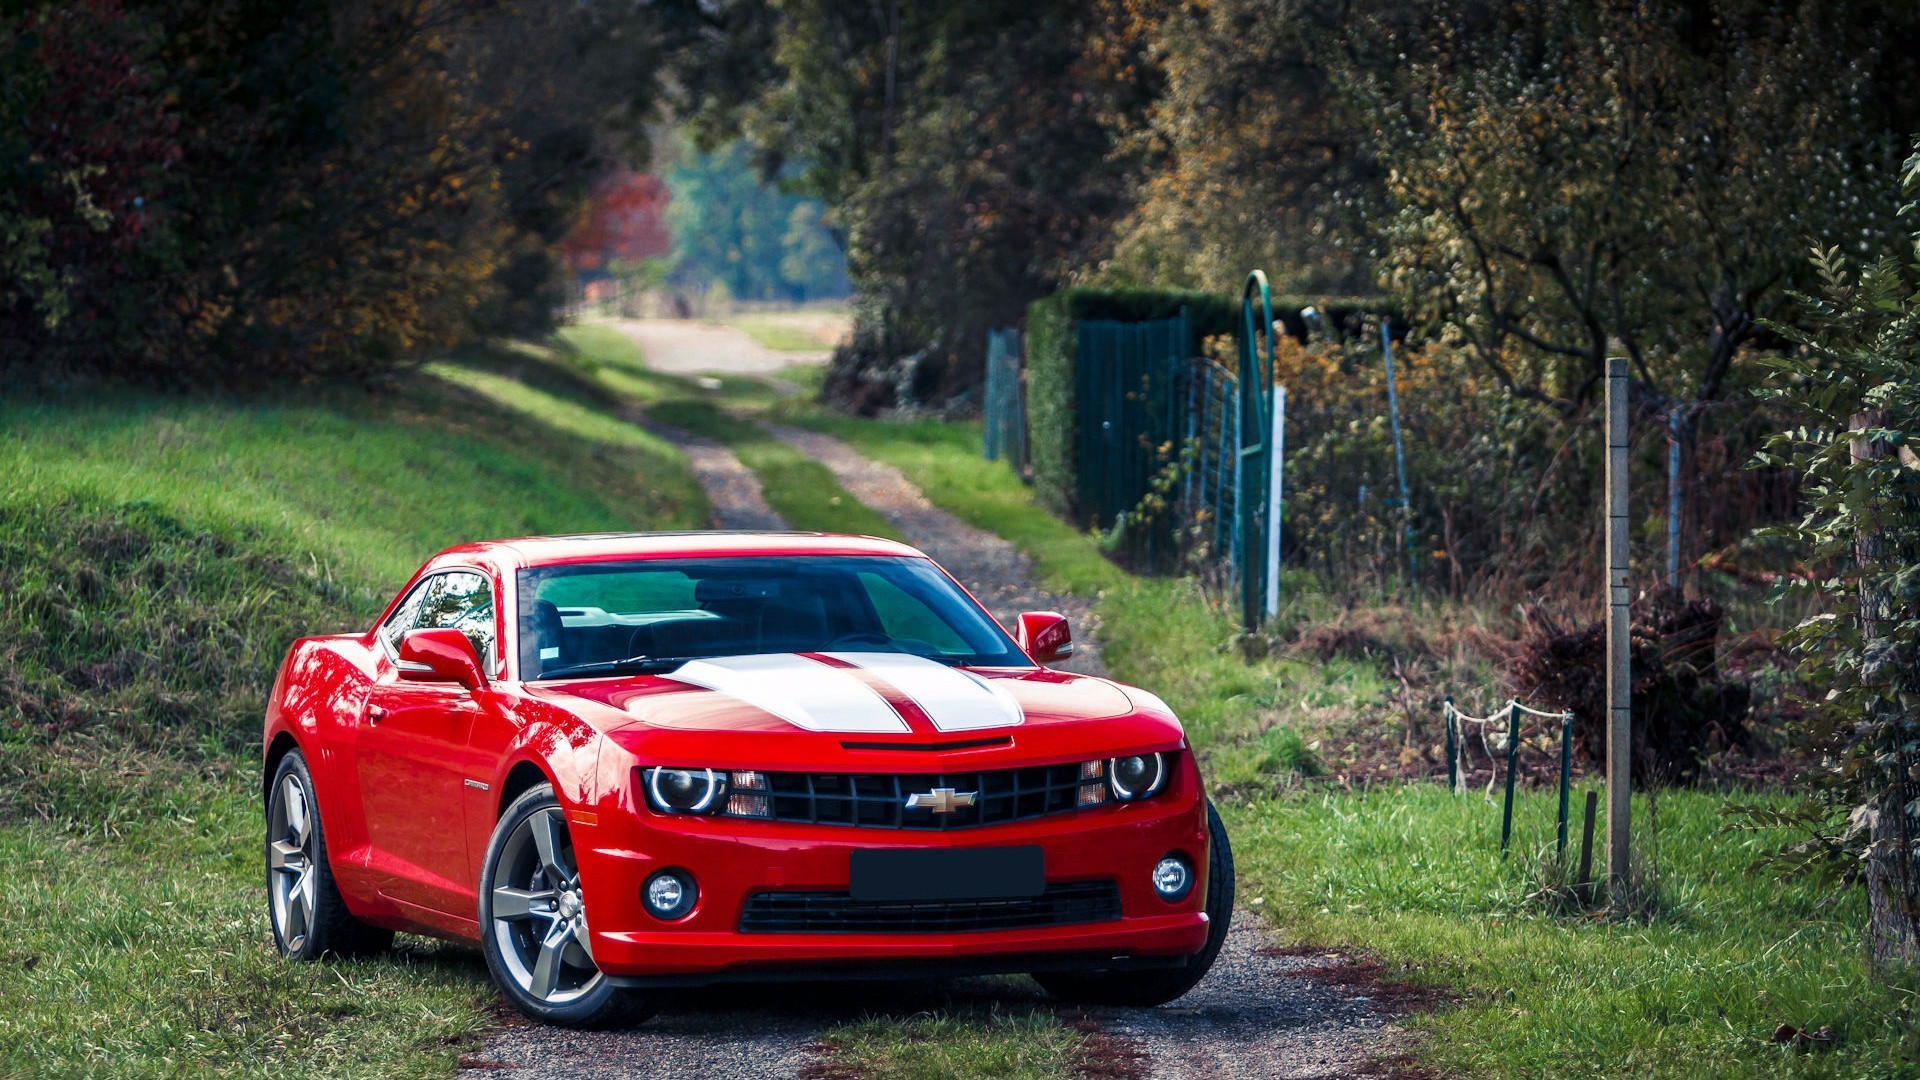 General 1920x1080 car red cars vehicle outdoors Chevrolet Chevrolet Camaro American cars muscle cars racing stripes